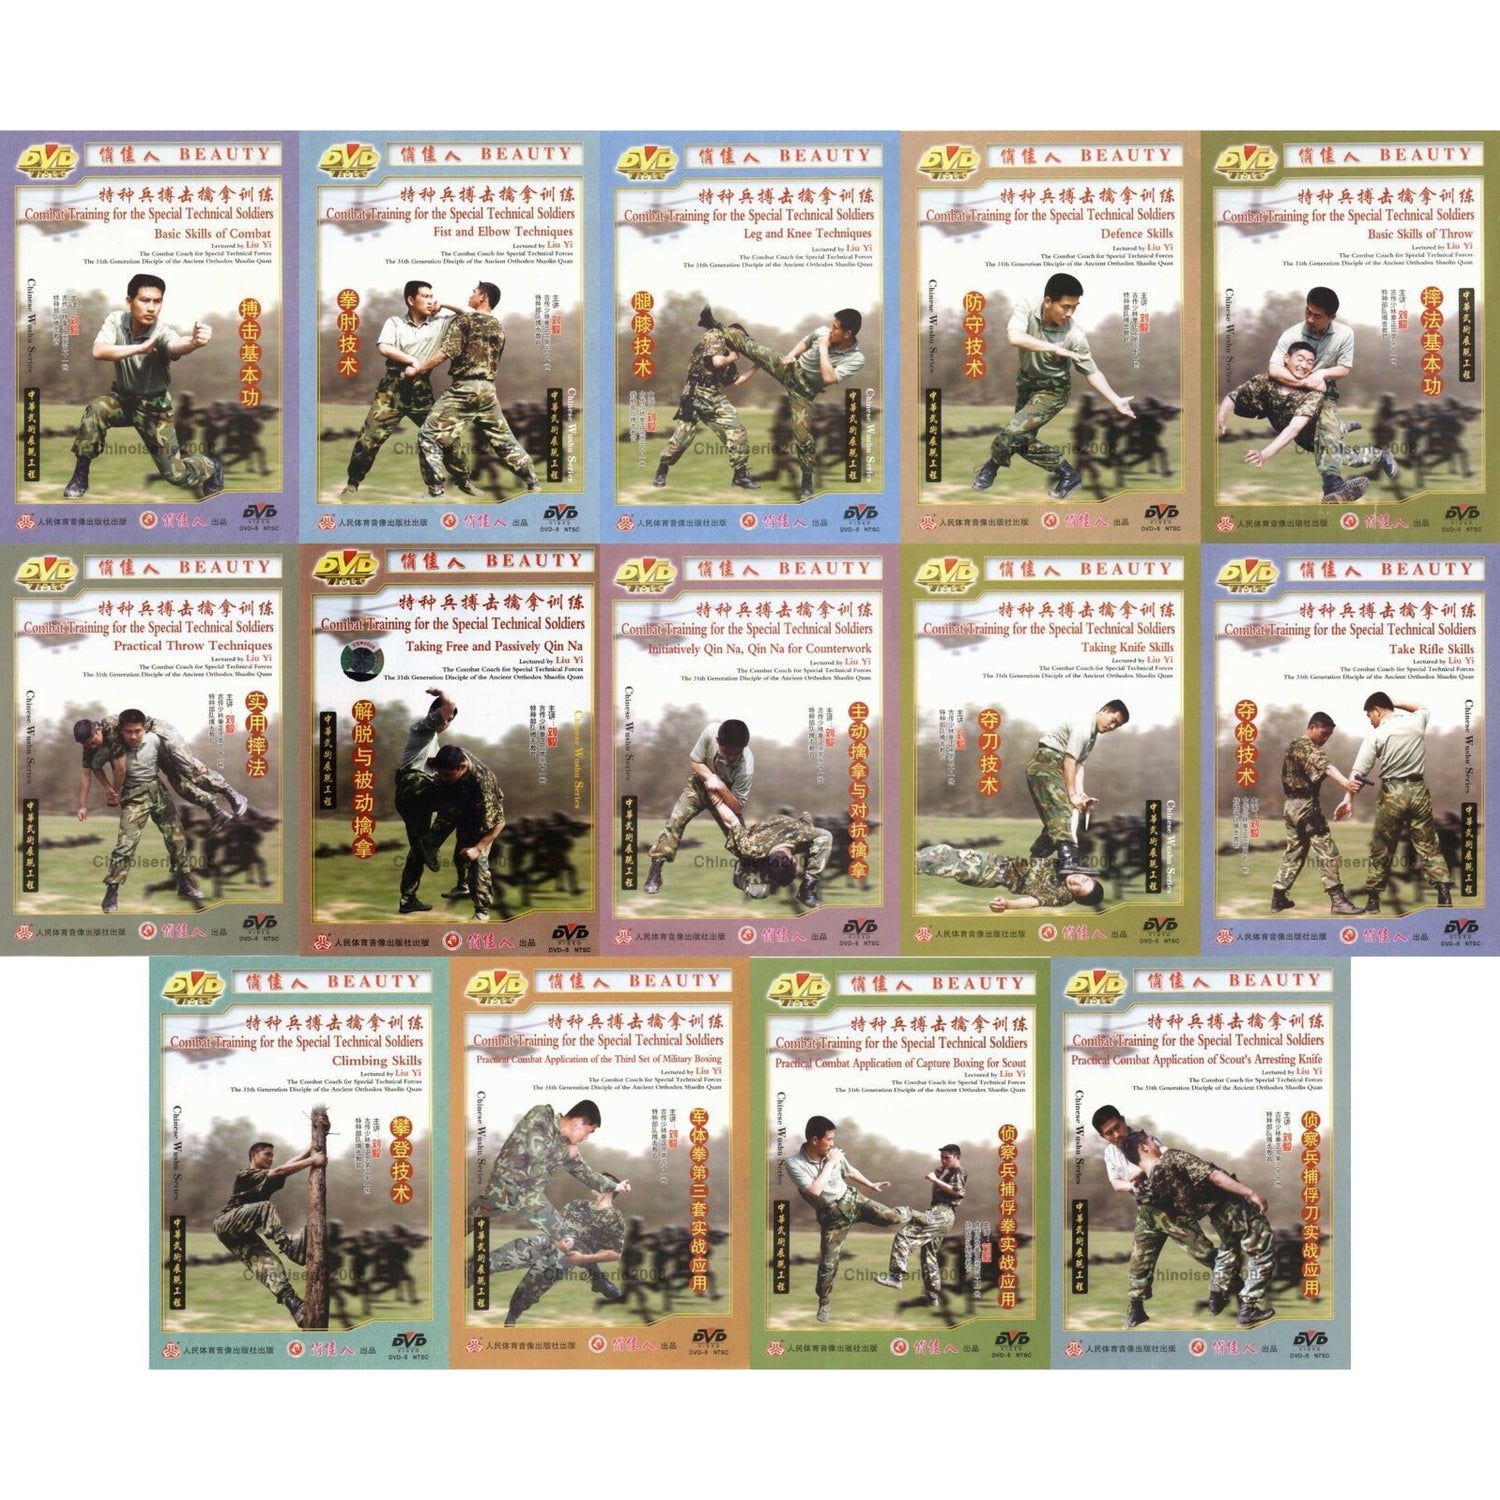 Chinese Military Hand to Hand Combat 14 DVD Set by Liu Yi - Budovideos Inc